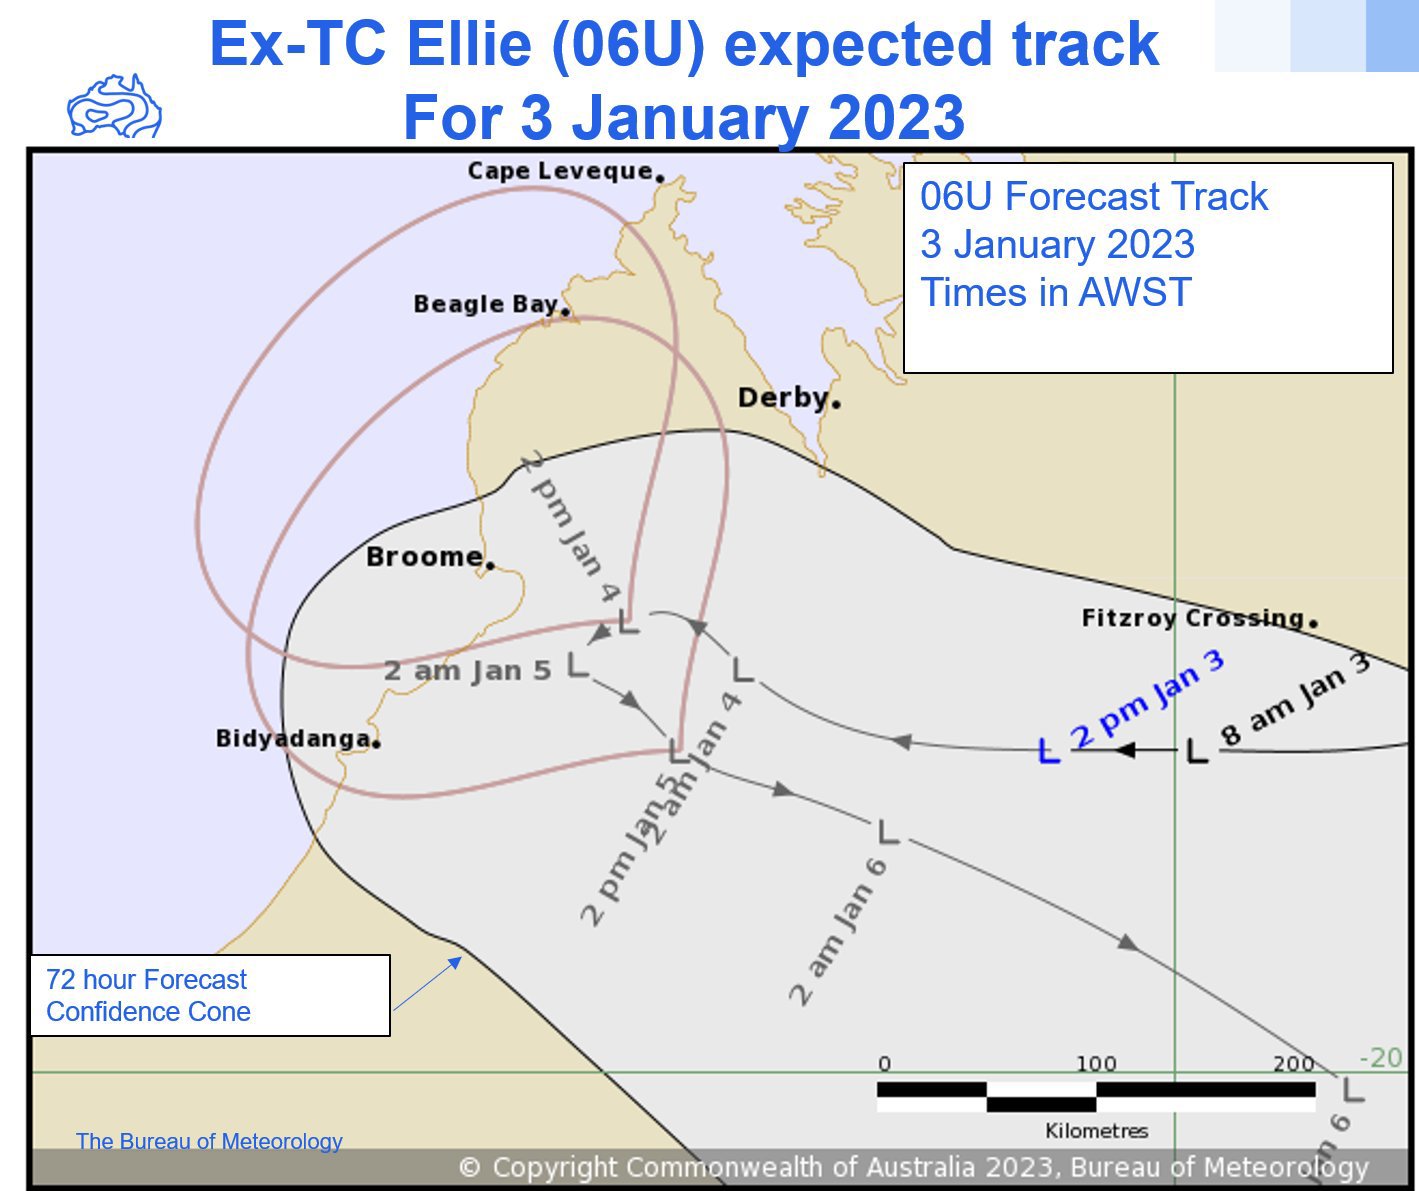 The expected track of Ex-Tropical Cyclone Ellie for January 3, 2023.